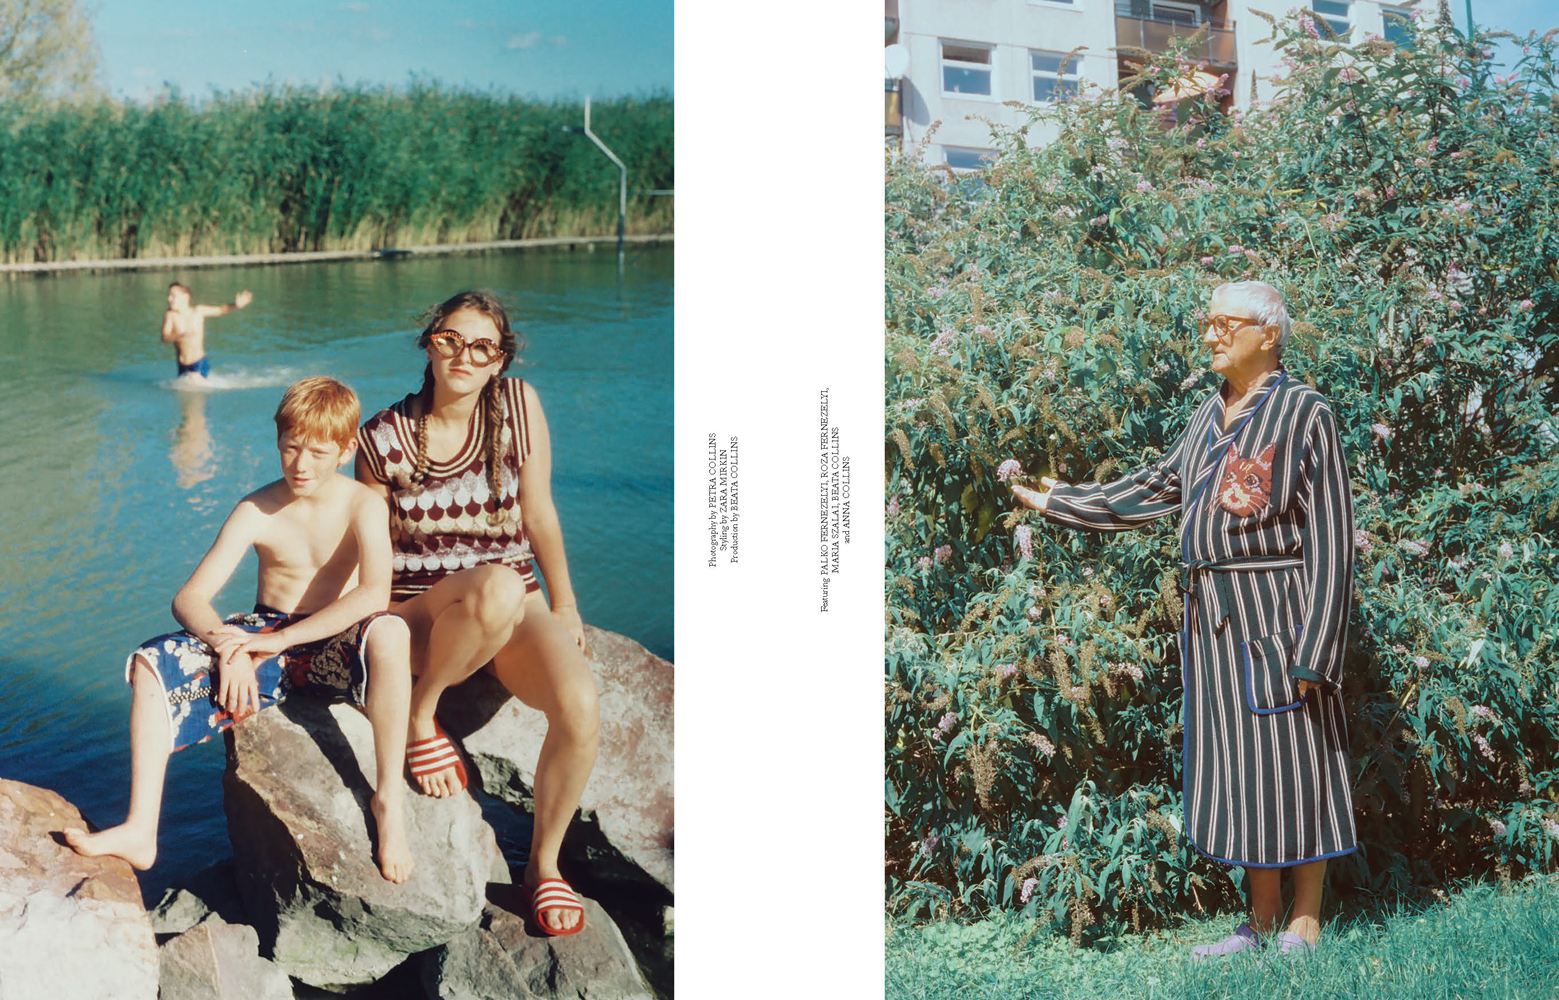 Dan Thawley | A Magazine Curated by Alessandro Michele | 112